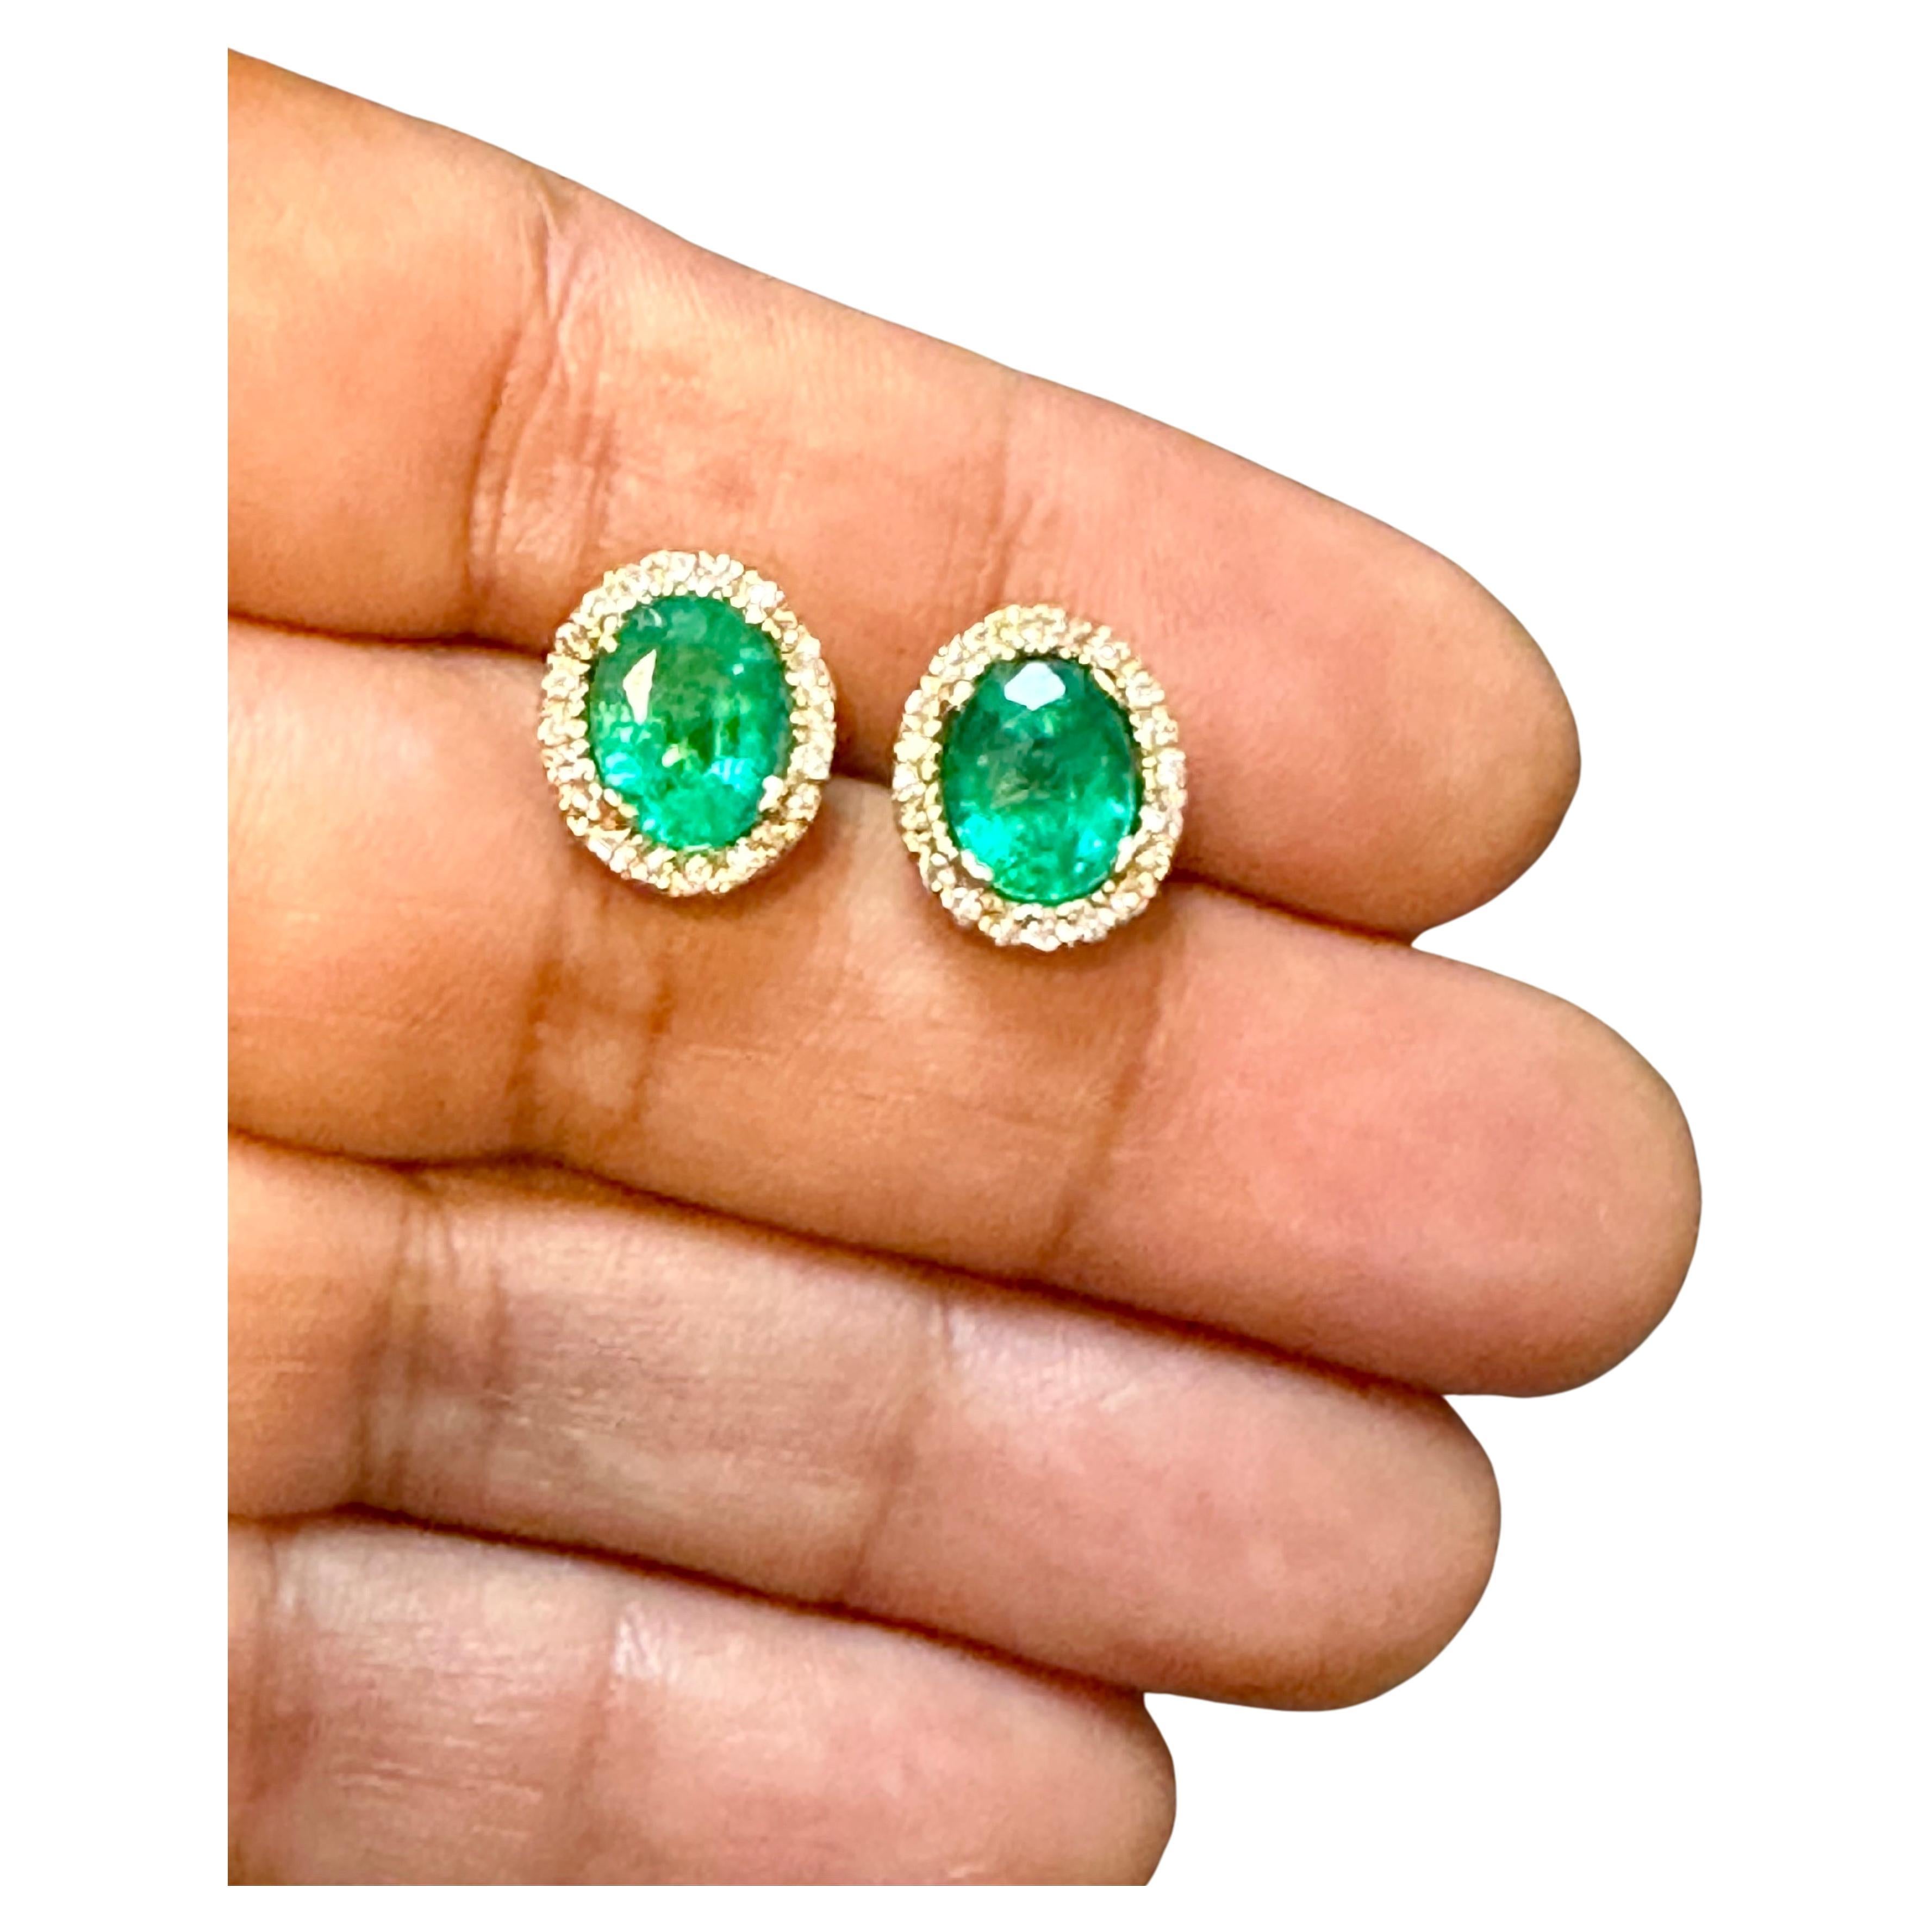 These stunning post back earrings feature a natural oval-shaped emerald weighing total approximately 6 carats, accompanied by brilliant round cut diamonds. Each emerald is 3 ct . The emeralds are of very fine quality with a beautiful color,